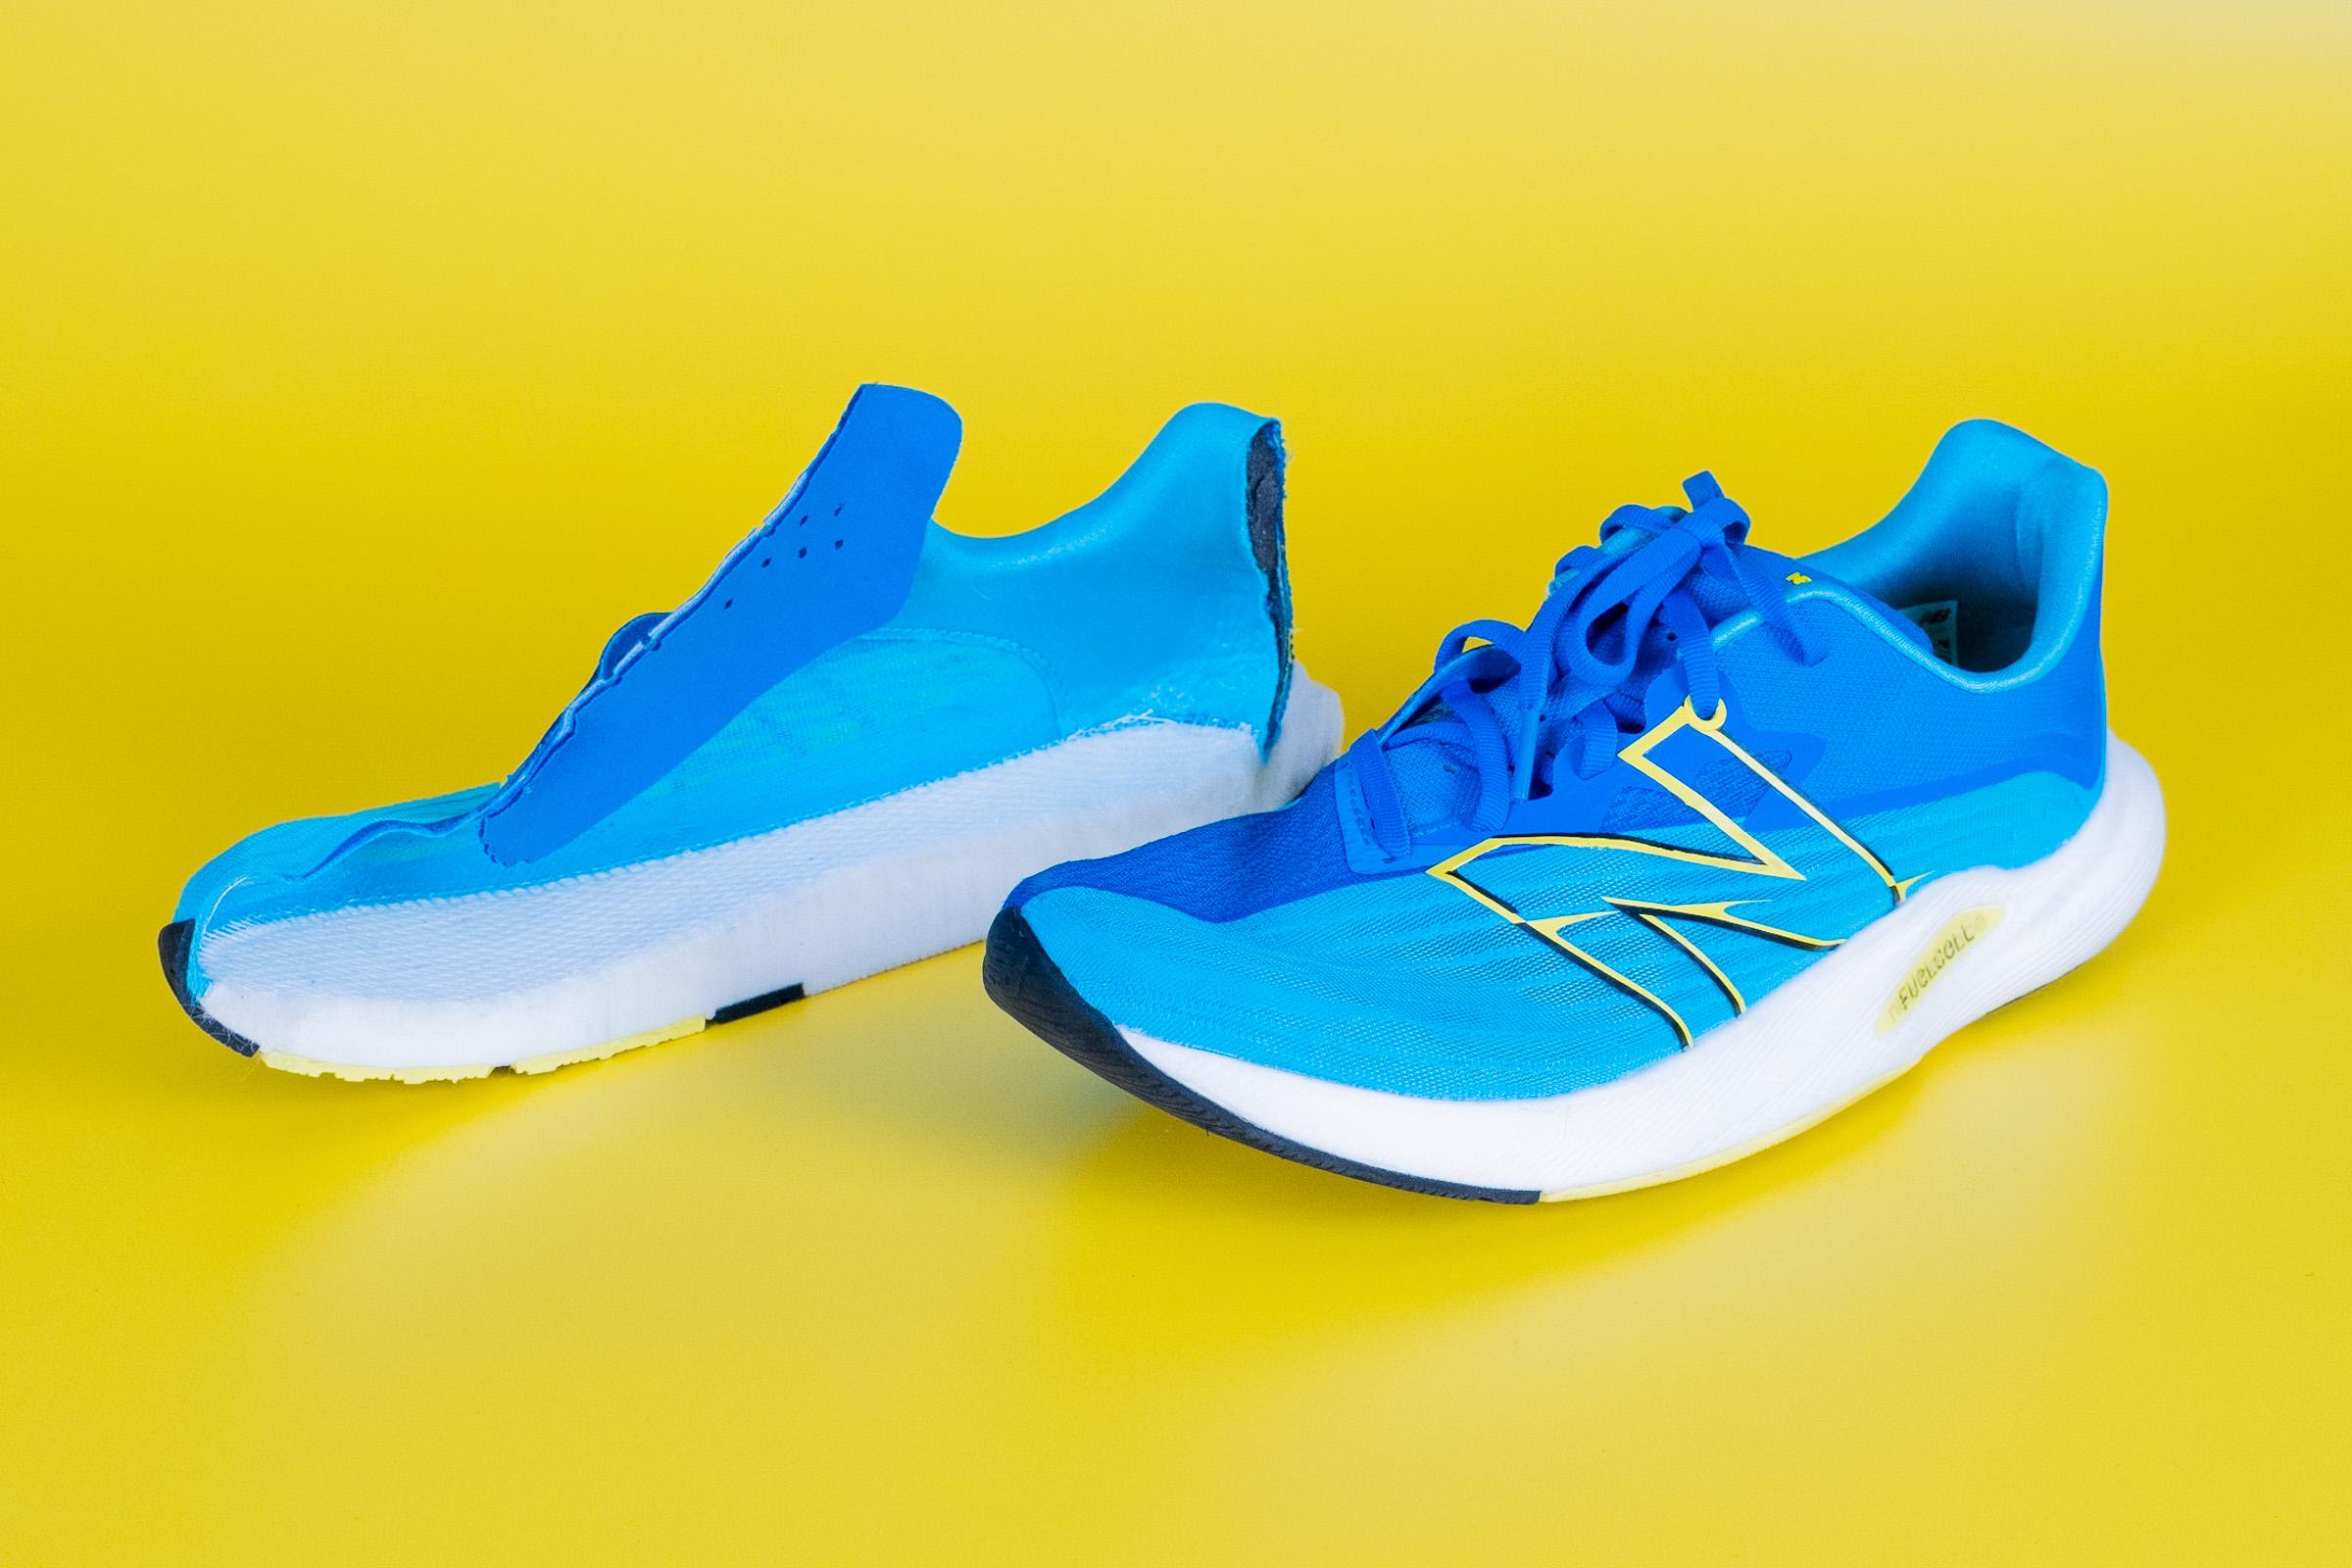 Cut in half: New Balance FuelCell Rebel v2 Review